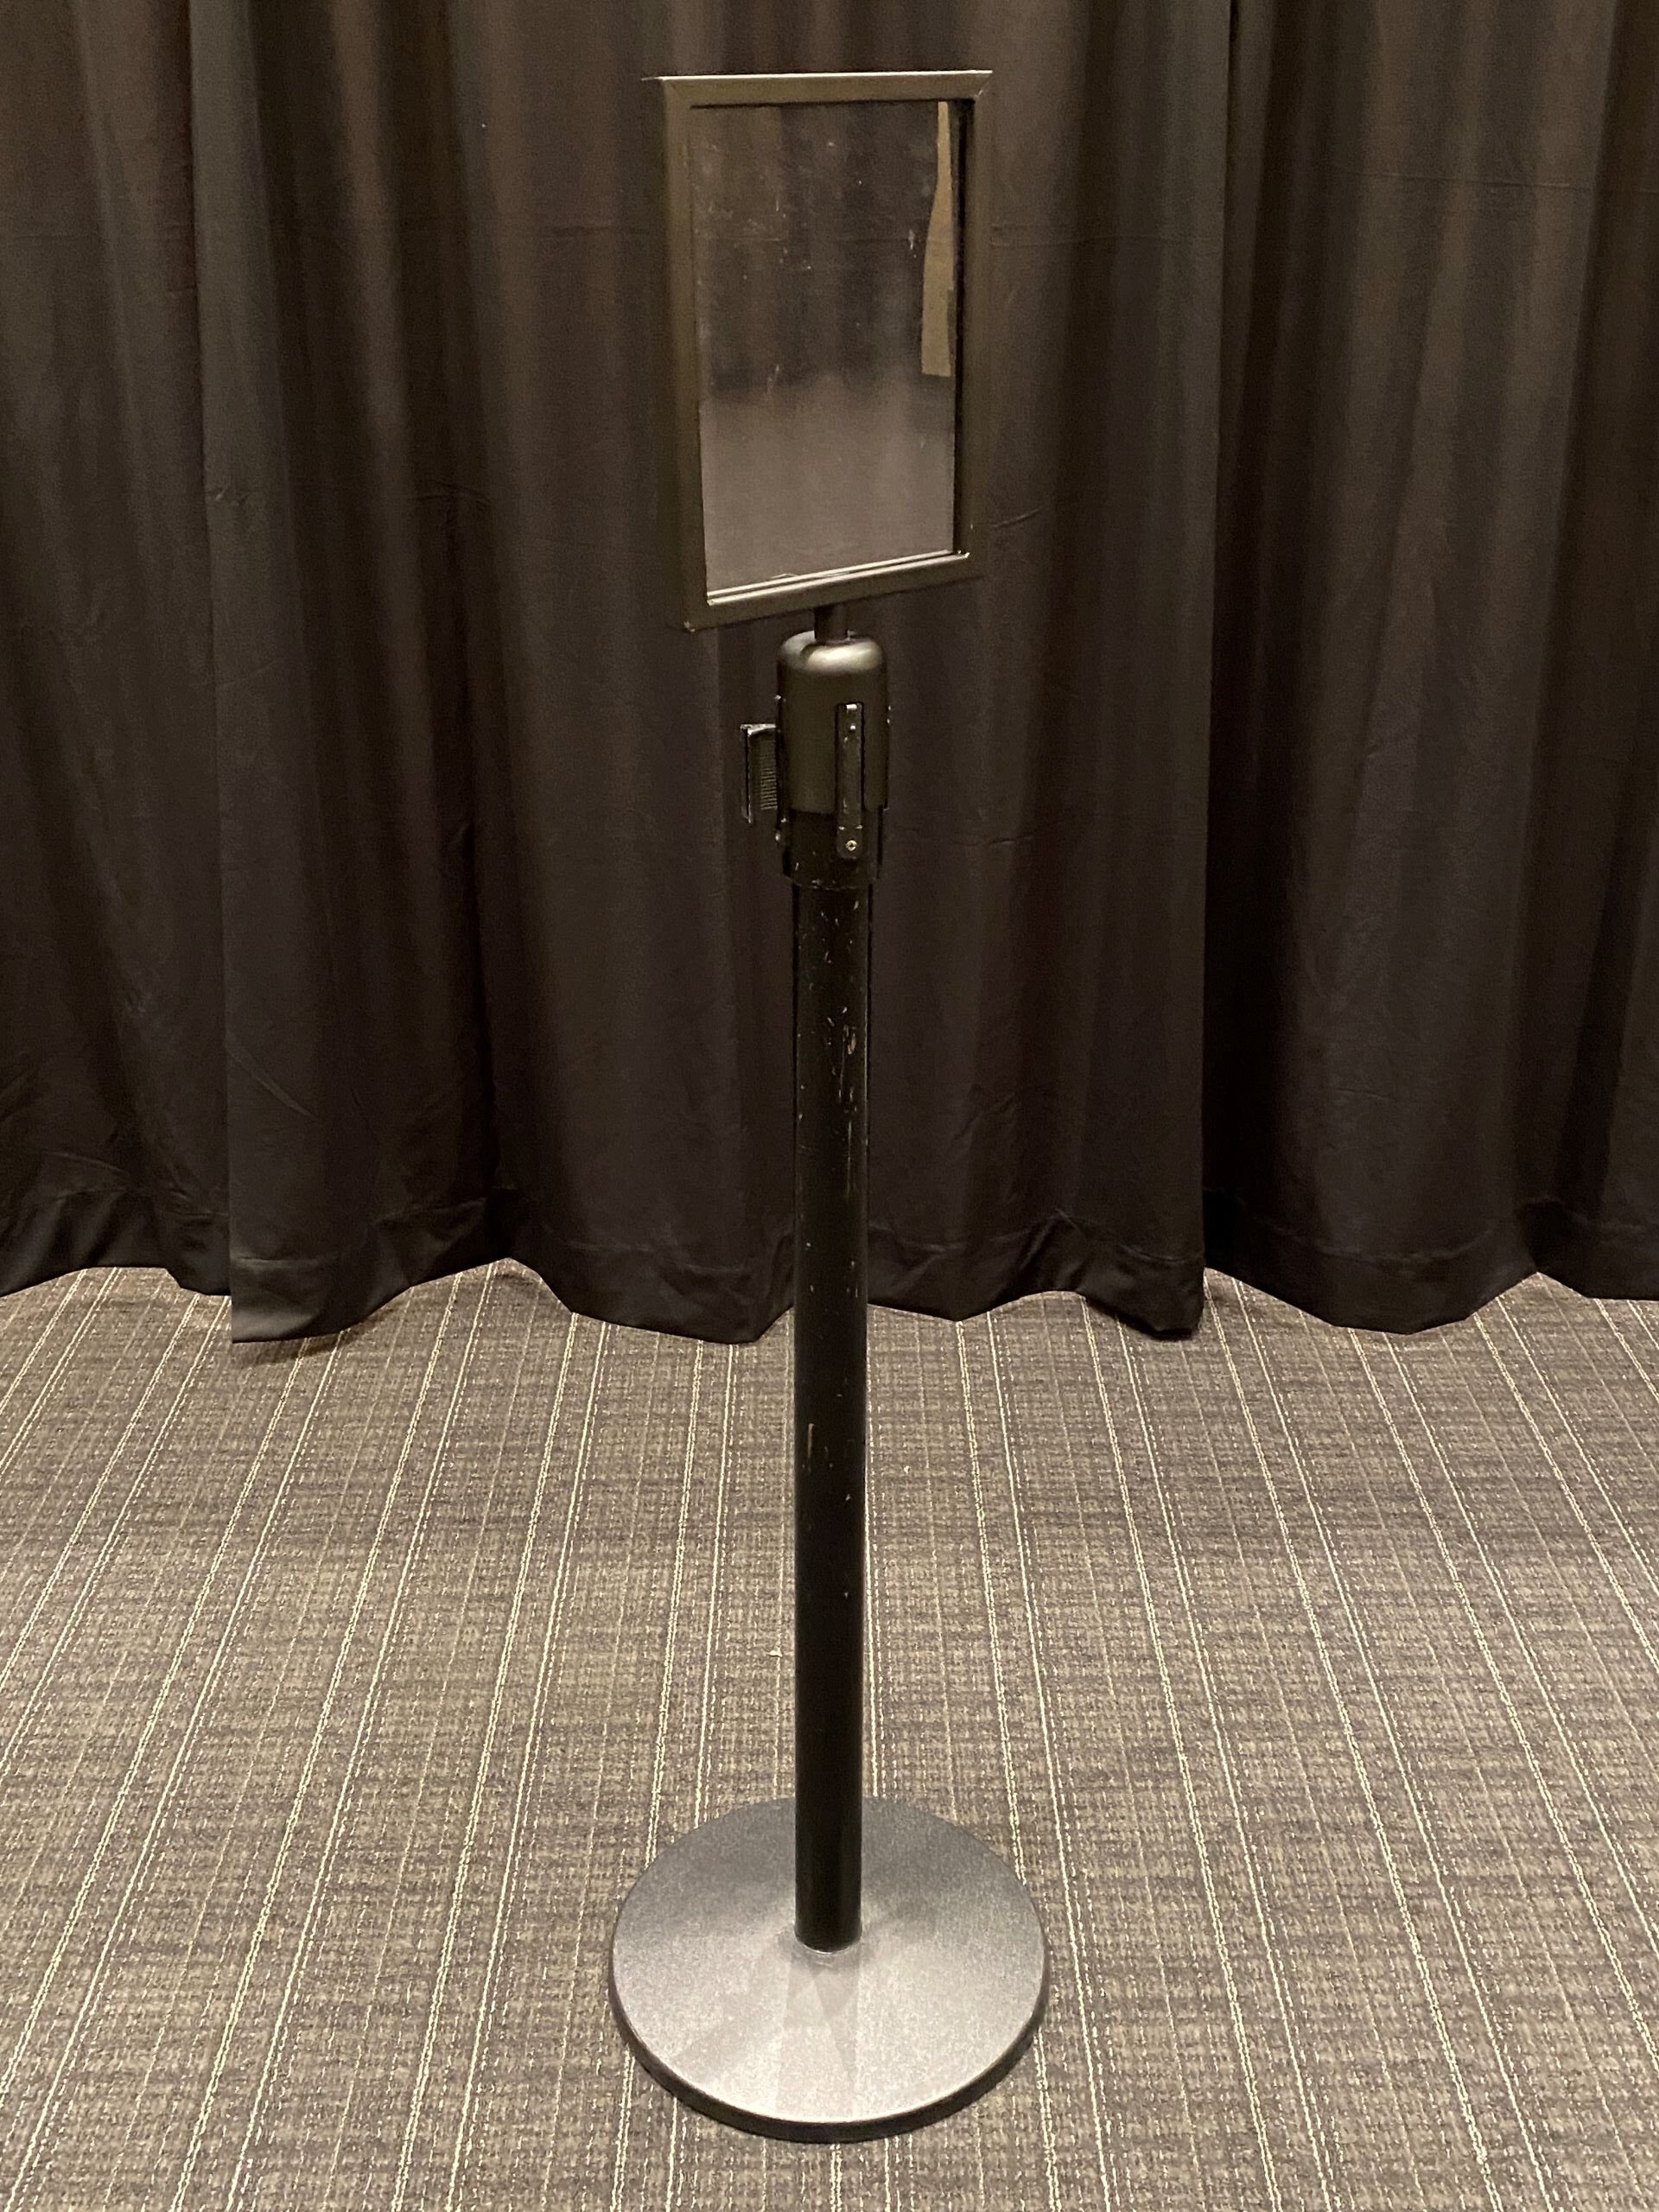 A black stanchion with a clear plastic sign on top.